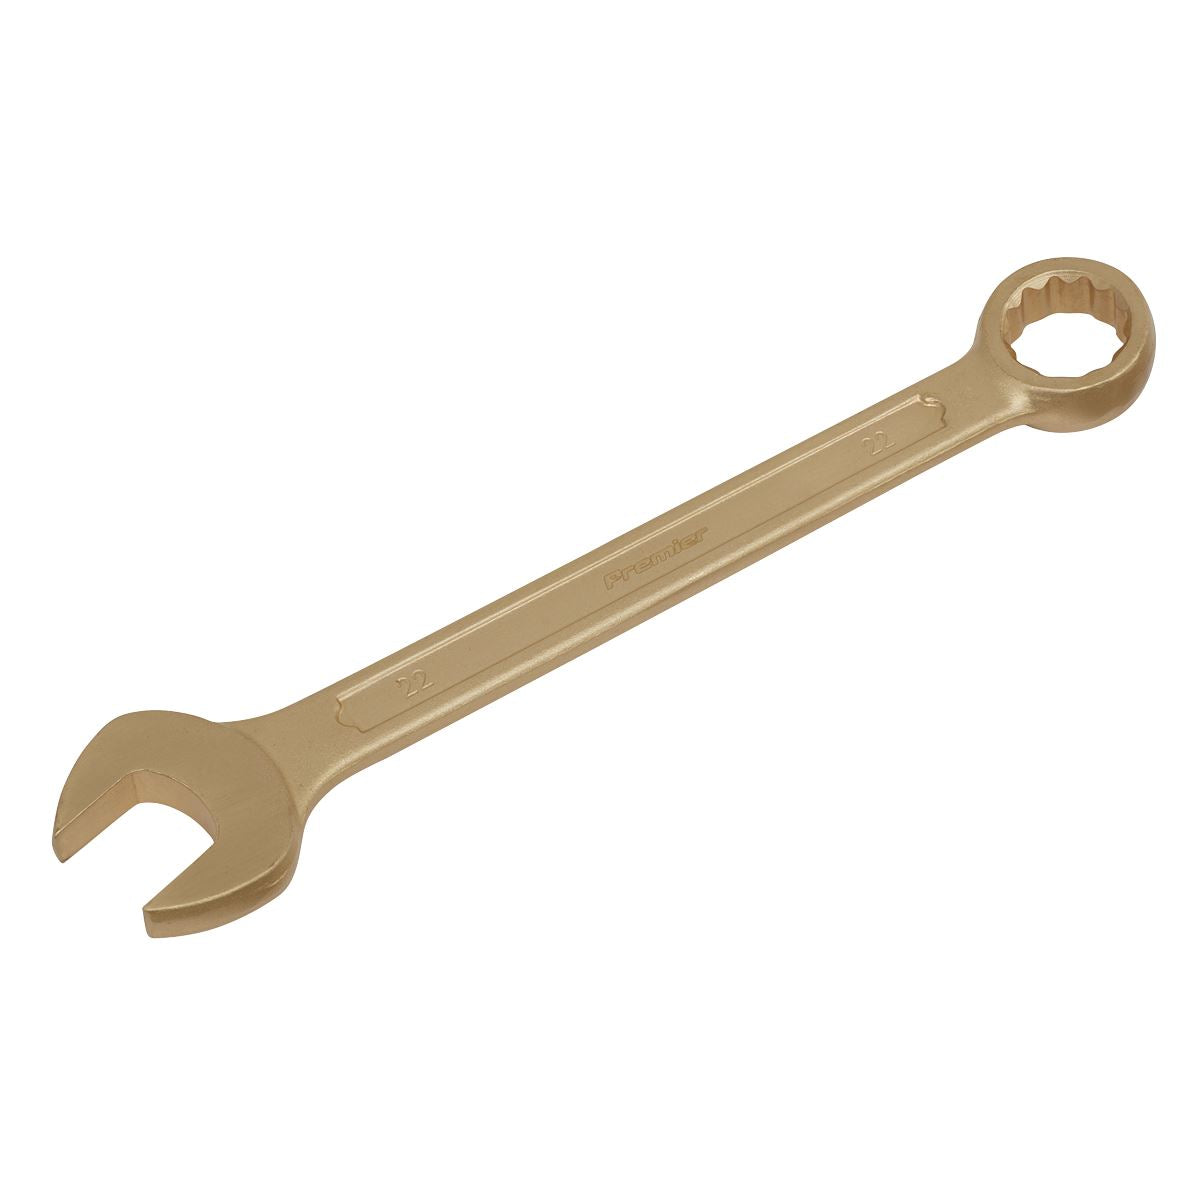 Sealey Premier Combination Spanner 22mm - Non-Sparking